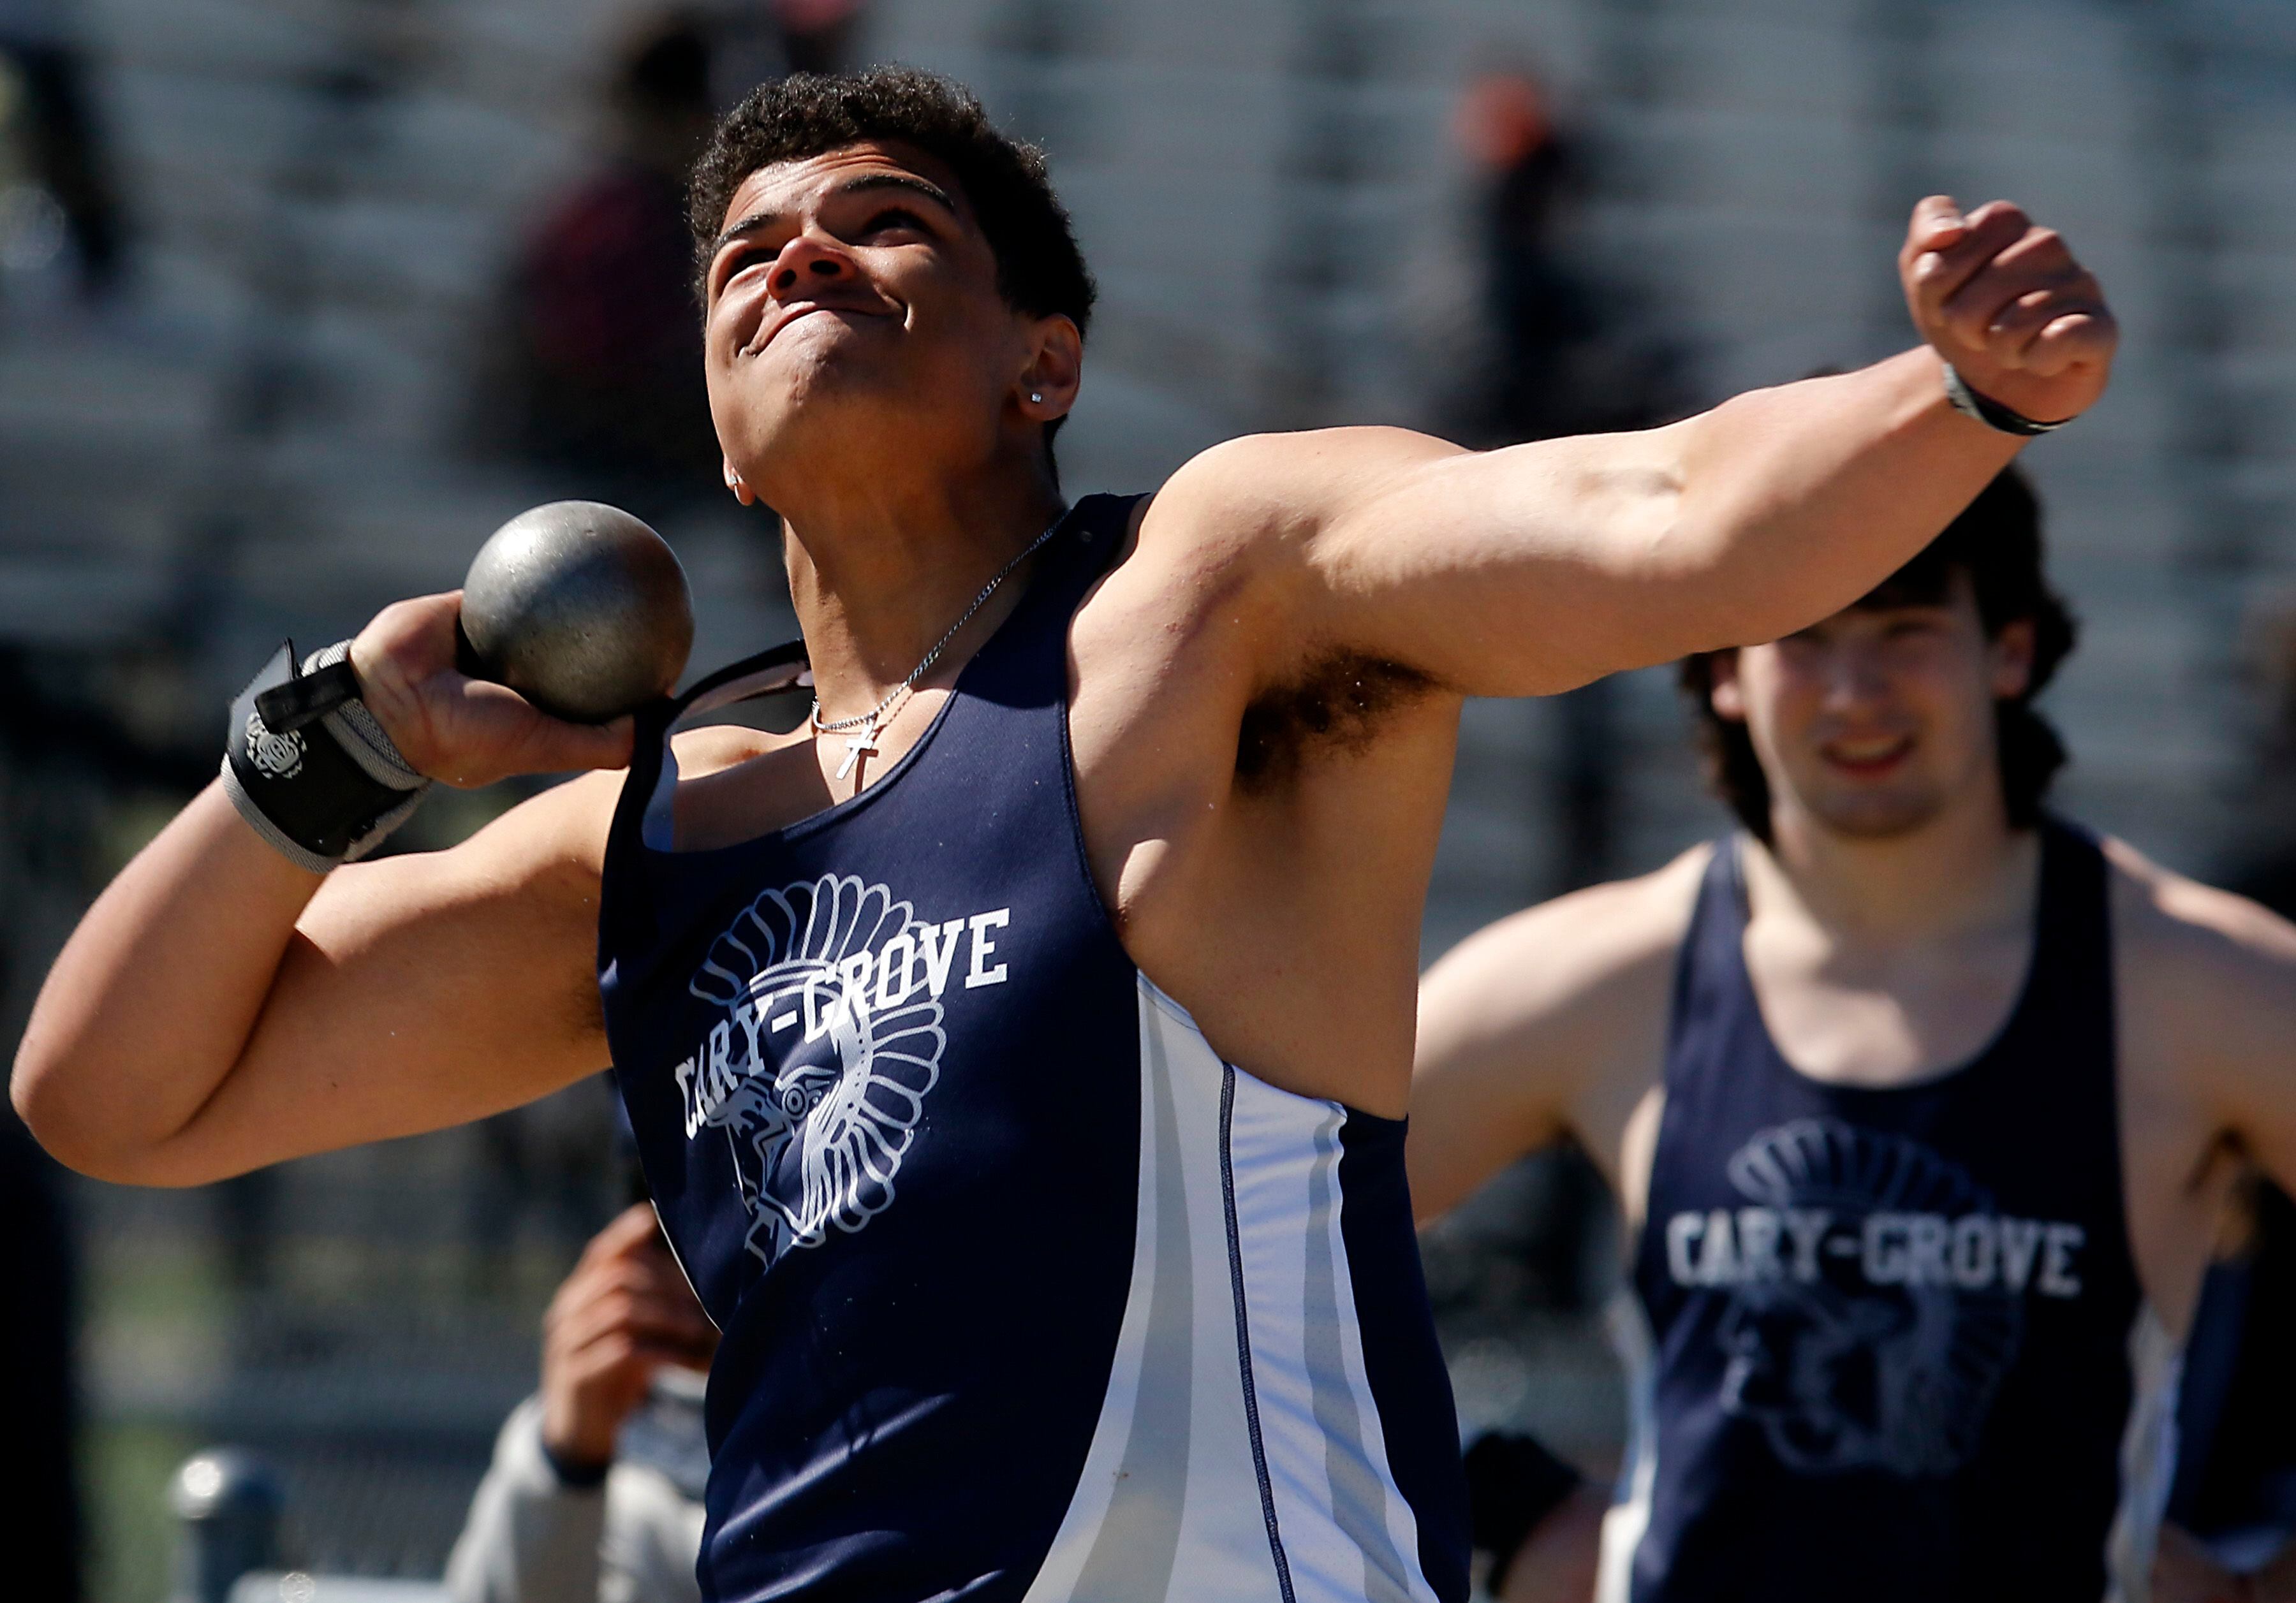 Cary-Grove’s Reece Ihenacho throws the shot putt on Friday, April 19, 2024, during the McHenry County Track and Field Meet at Cary-Grove High School.